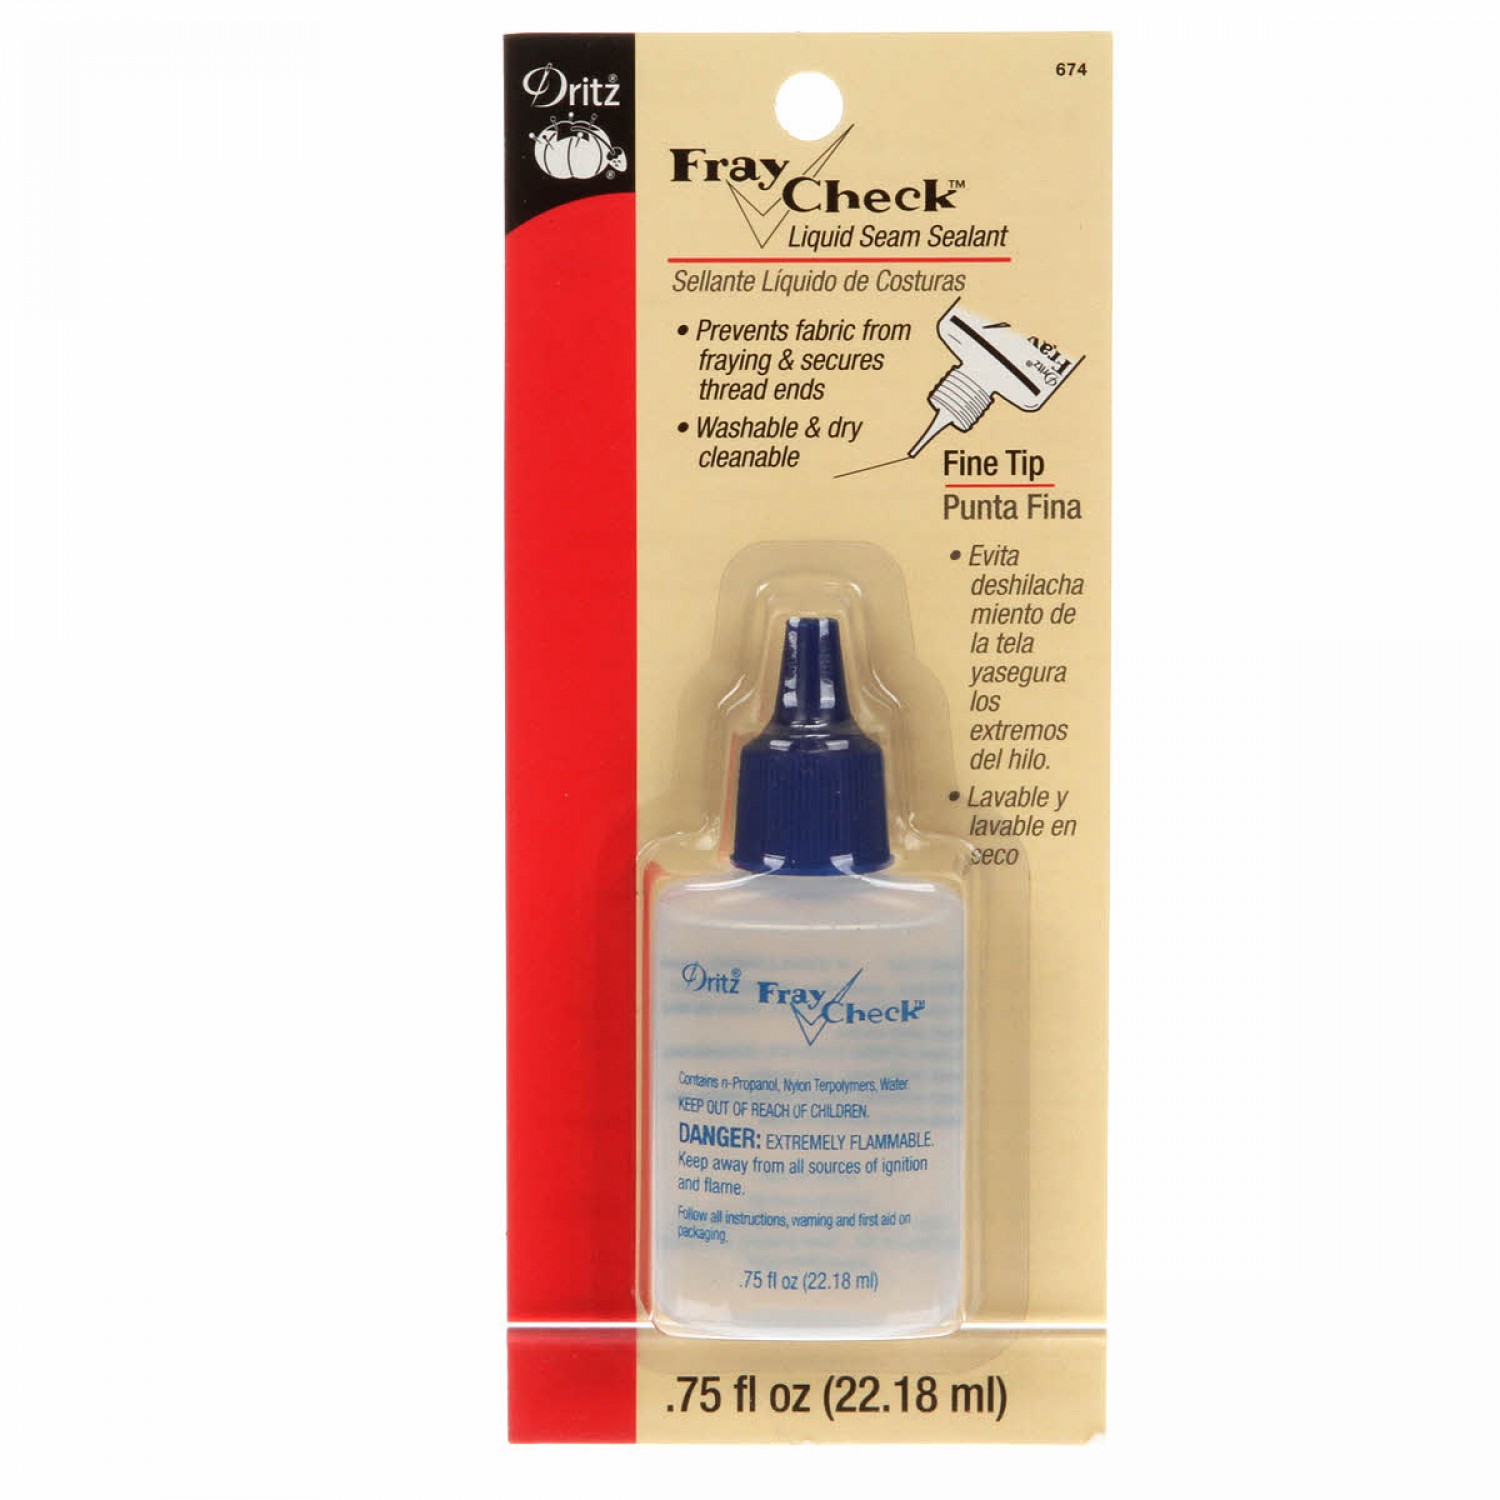 Fray Check Liquid Seam Sealant Two .75oz Bottles per Package. Prevents  Unfinished Fabric Edges From Fraying. Dritz 1674 